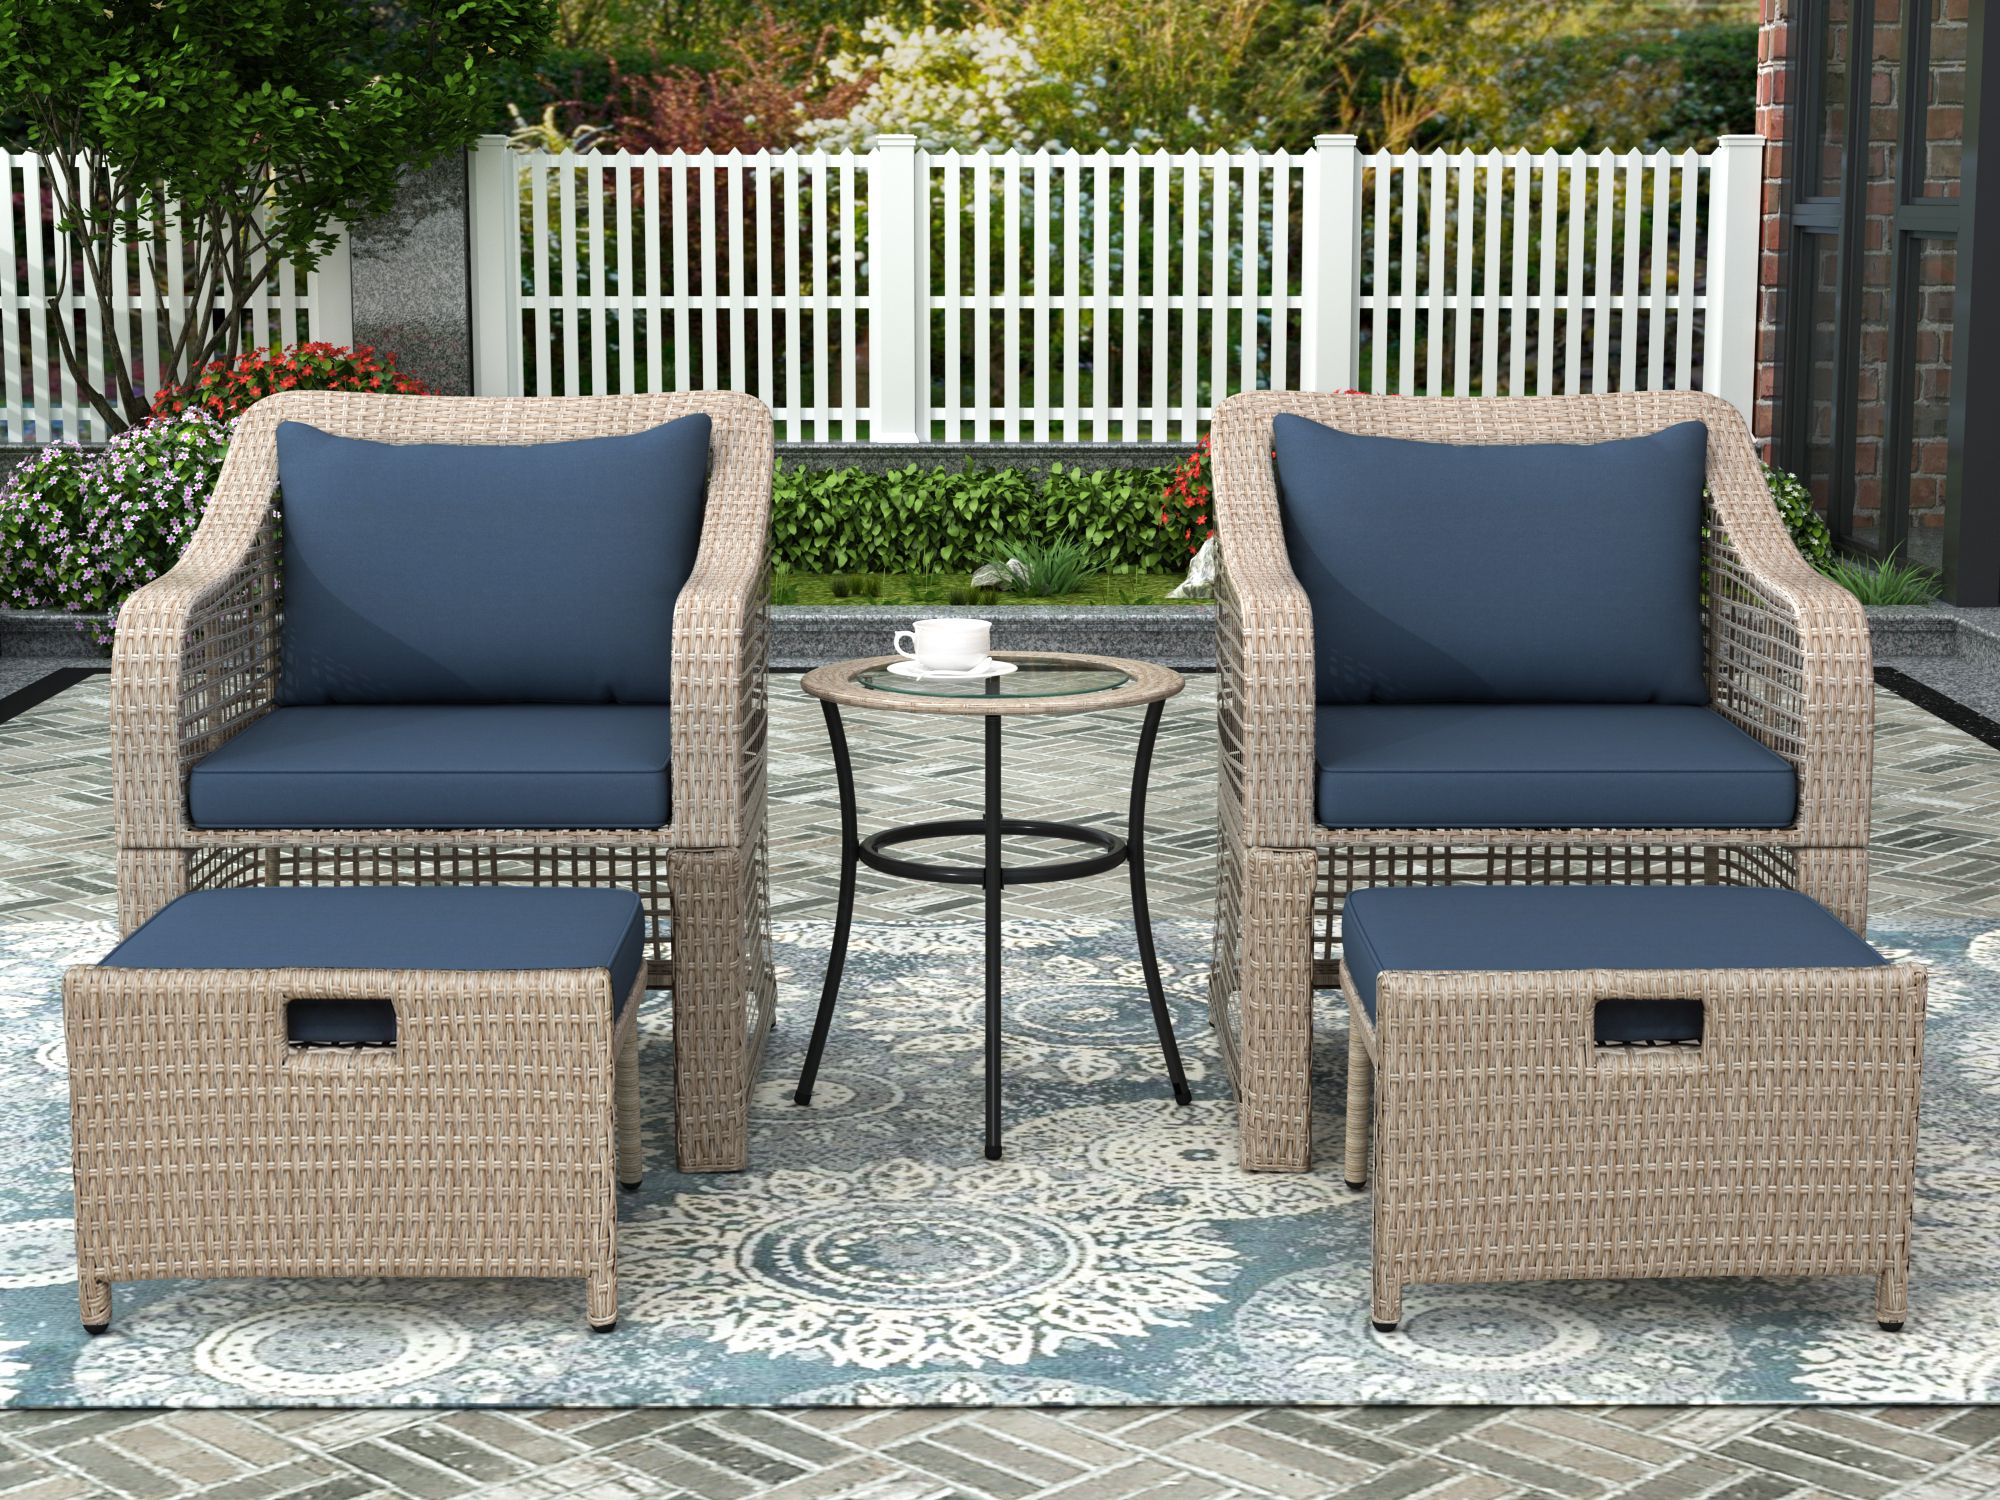 Patio Conversation Sets And Cushions Intended For Well Liked 5 Piece Outdoor Patio Chairs Set, Btmway Rattan Wicker Patio (View 4 of 15)